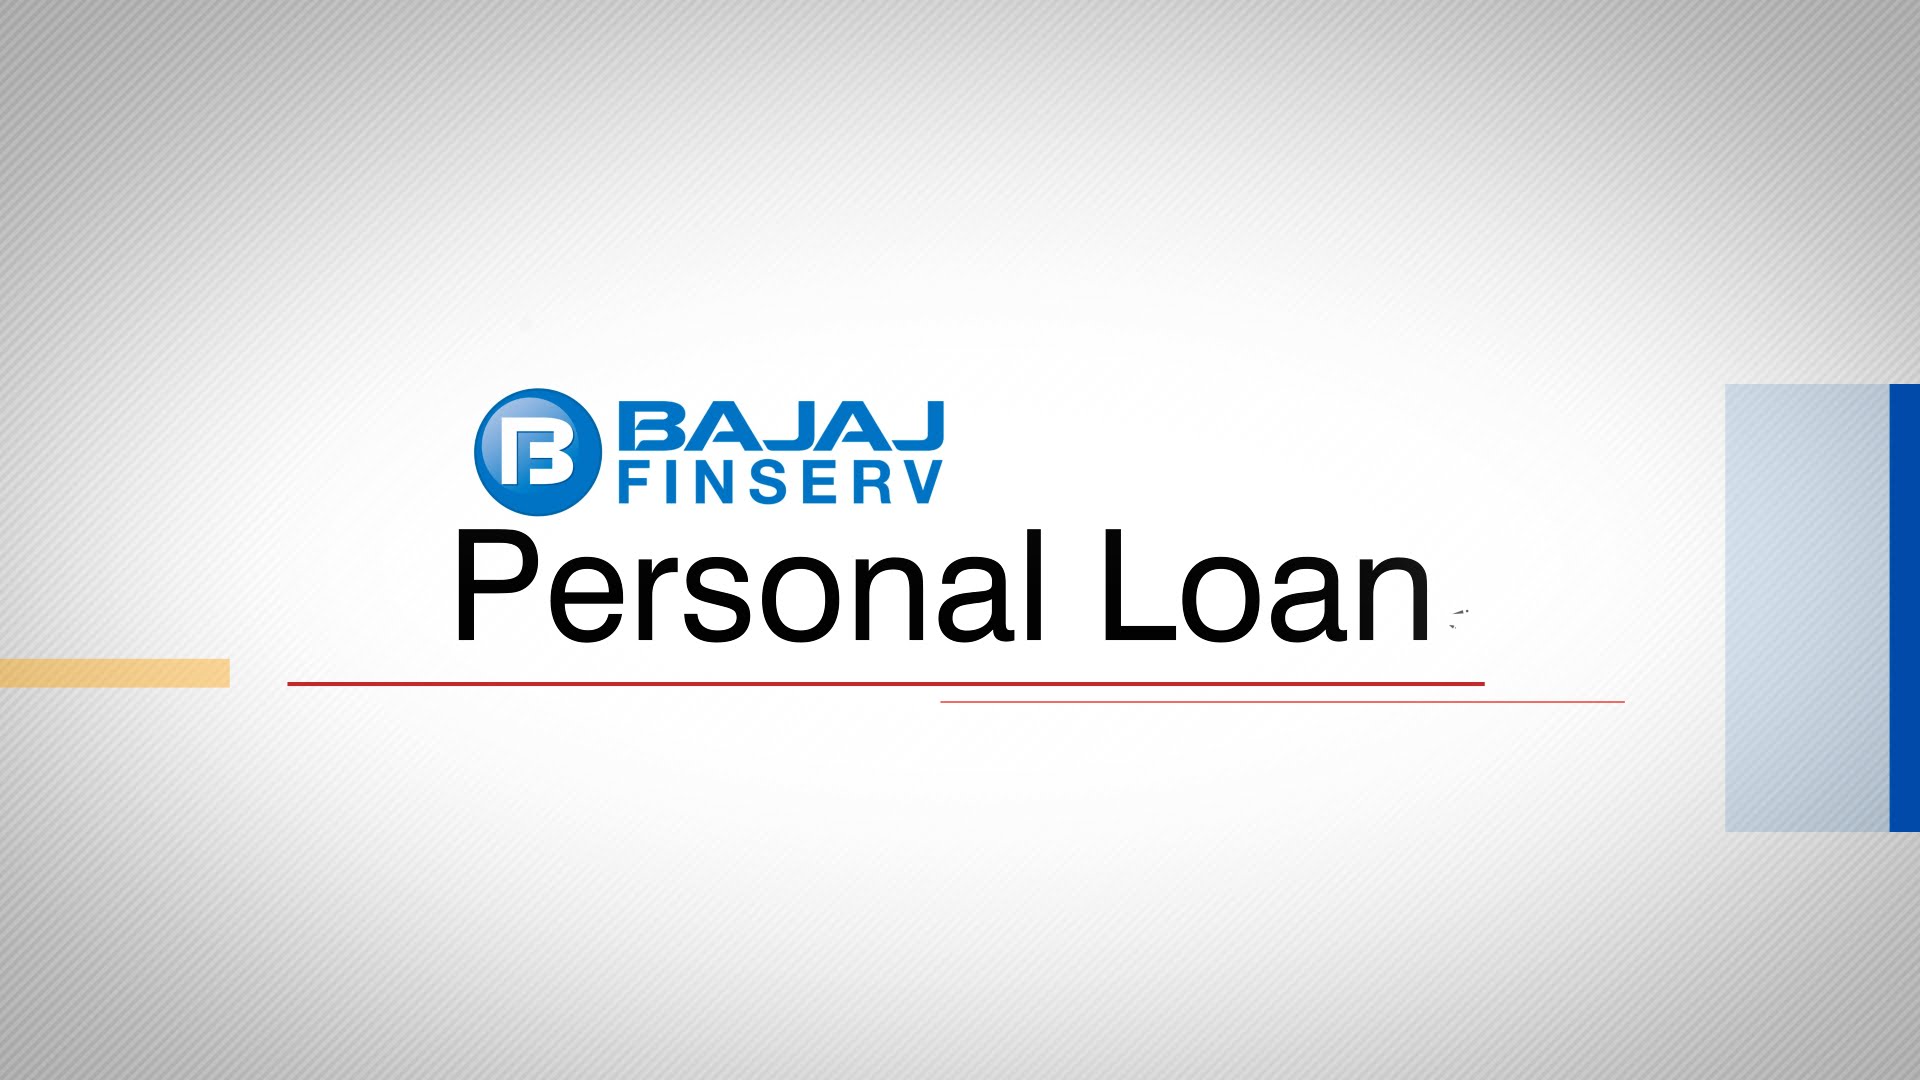 What benefits a Lucknow Resident can Avail after Applying Personal Loan with Bajaj Finserv